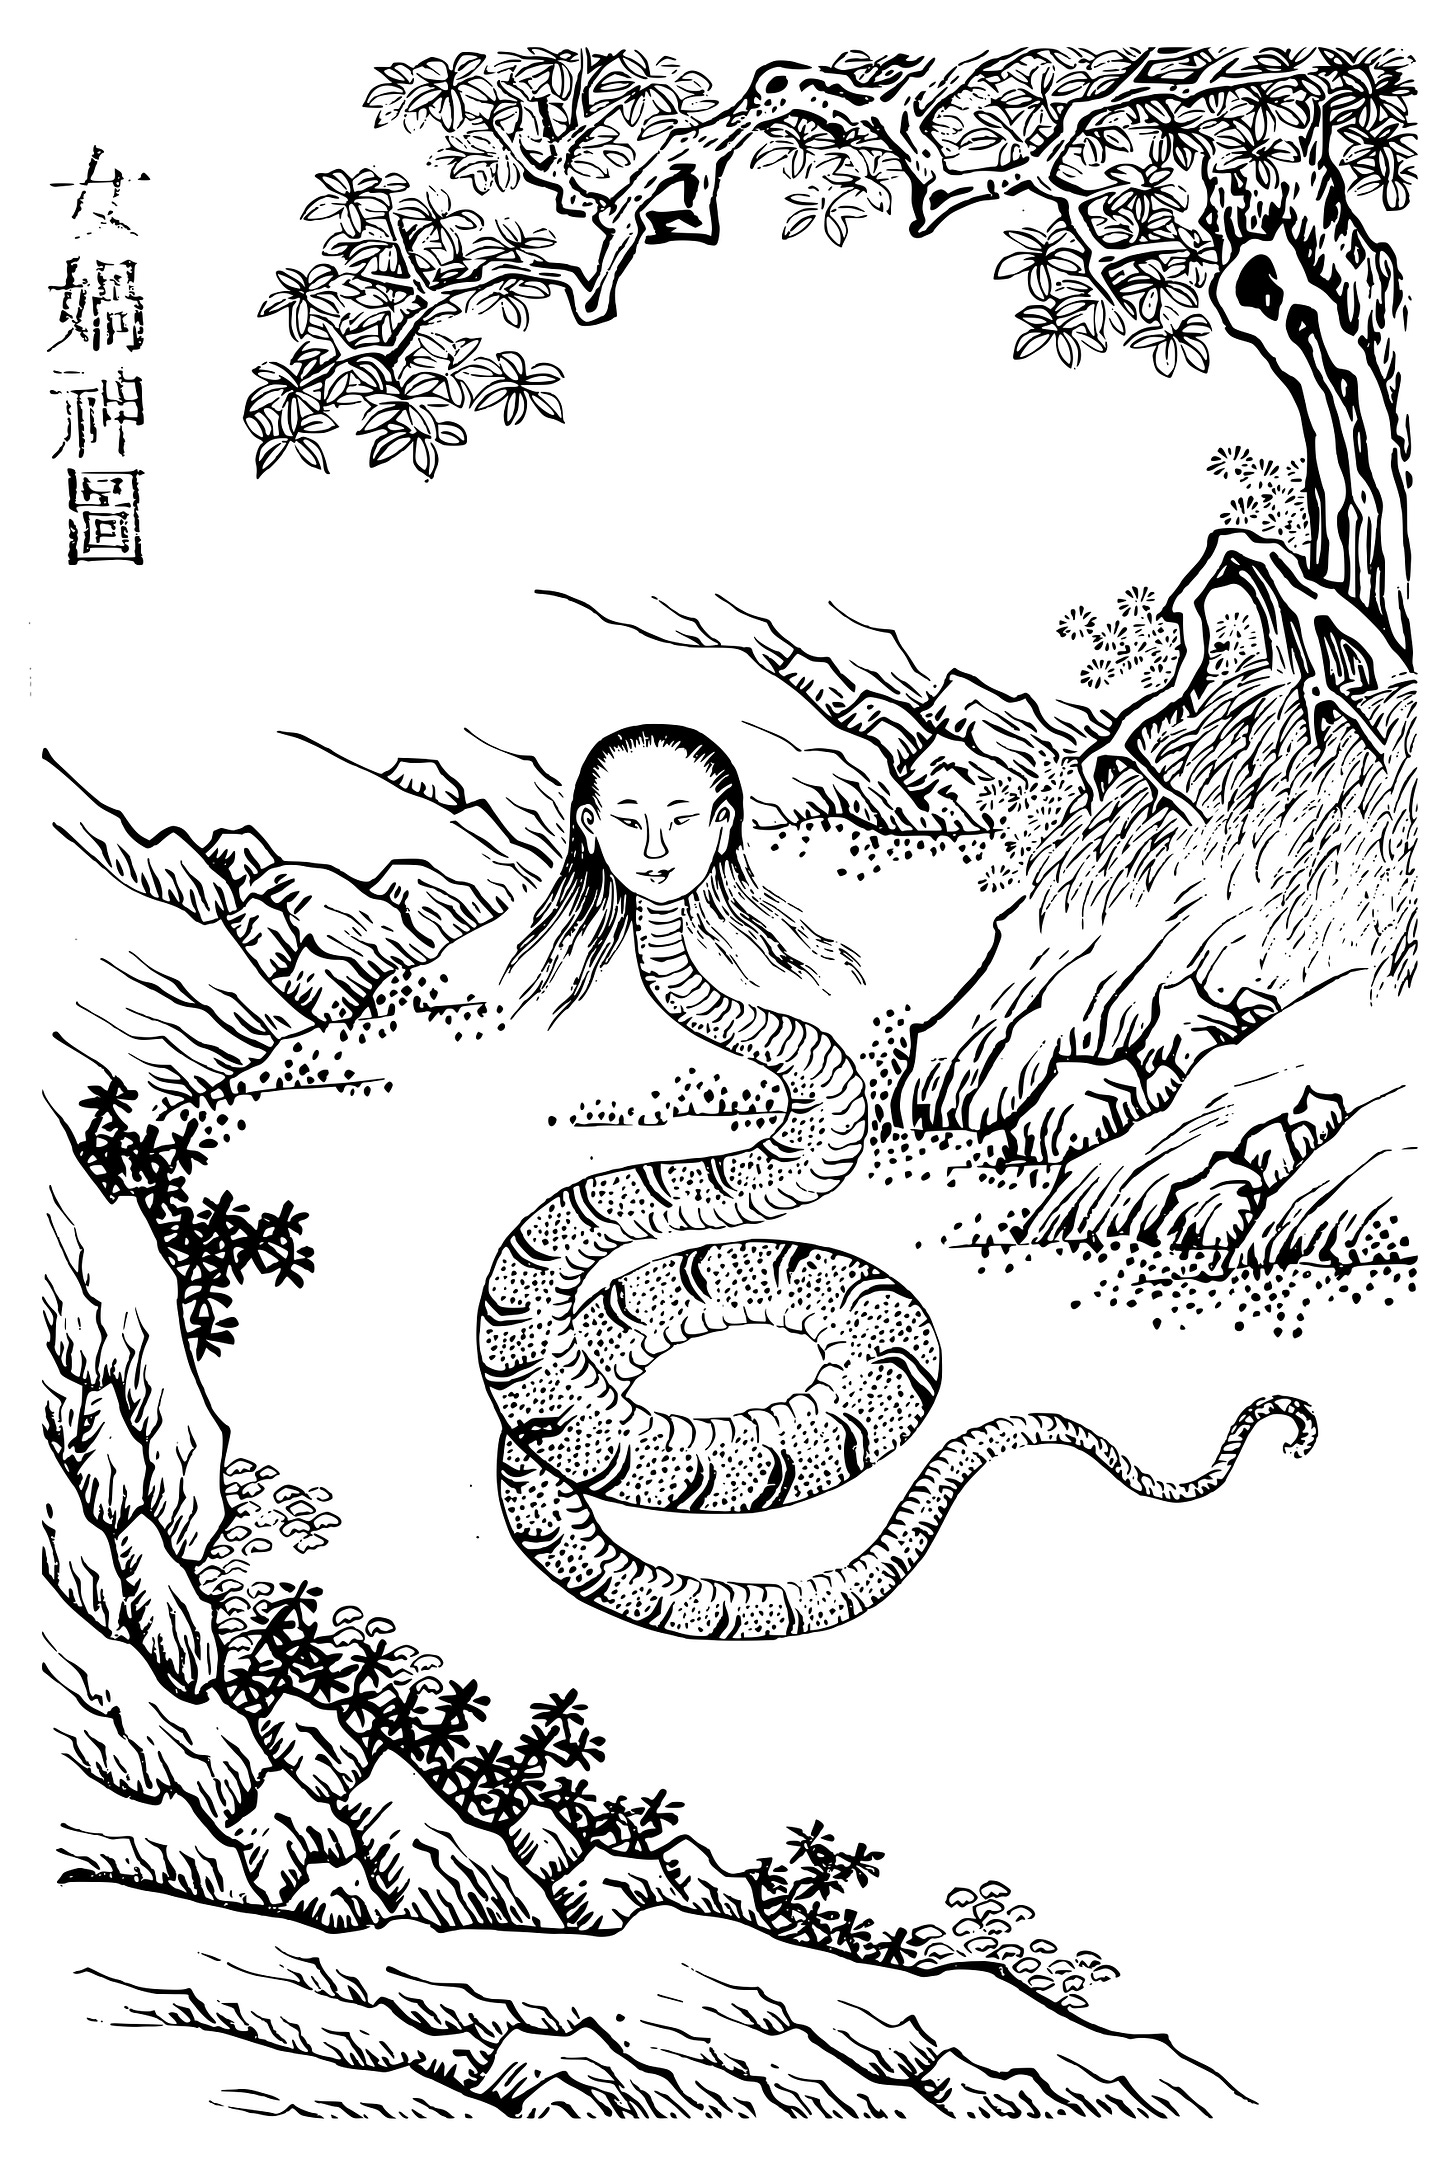 A picture of Nu Kua as her head is that of a normal woman, but her body is that of a snake.